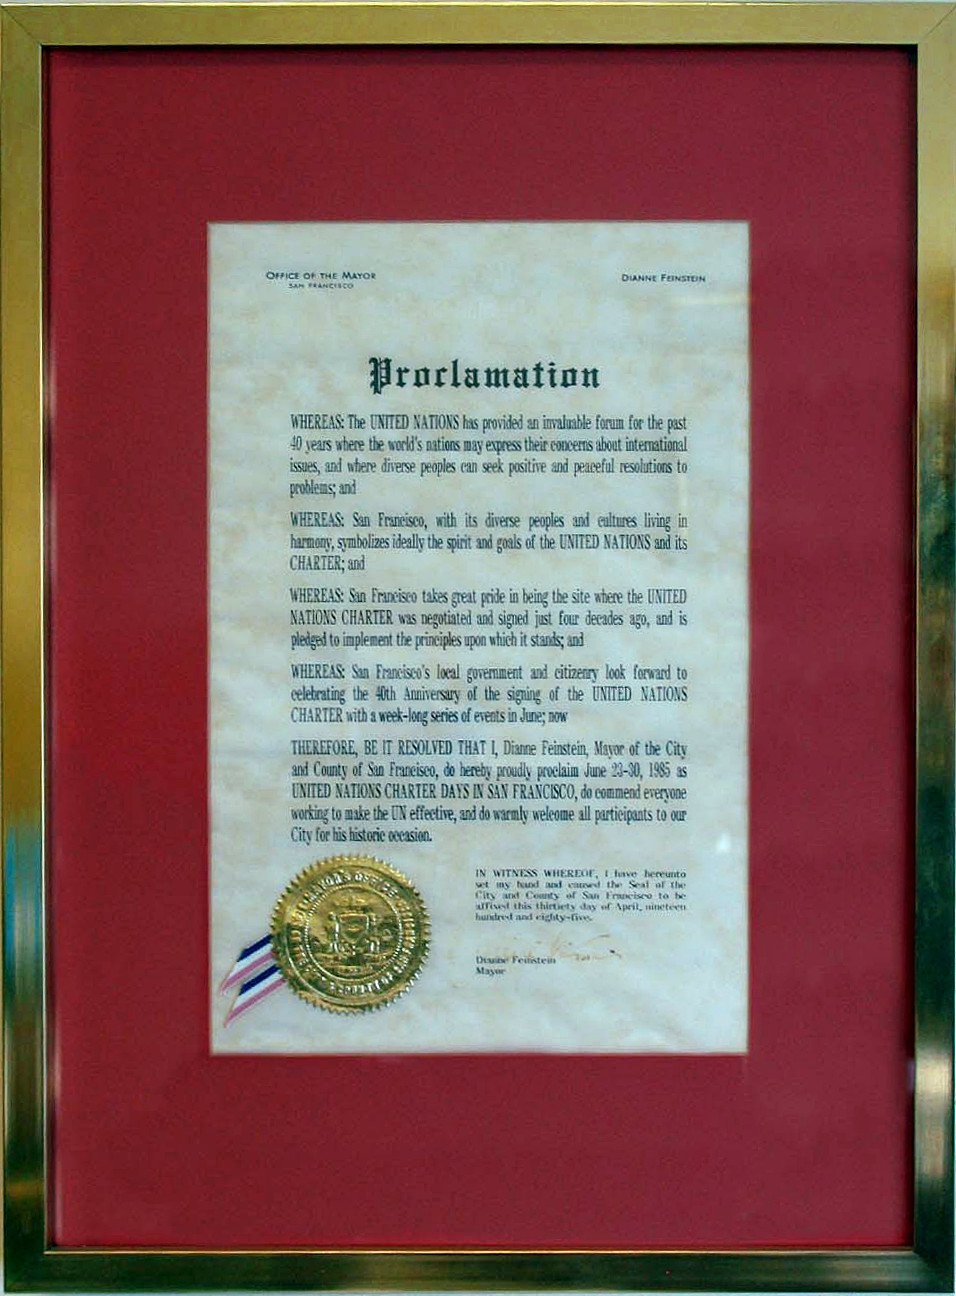 Proclamation of 1985, UNNY043G, 1985, The Mayor of San Francisco